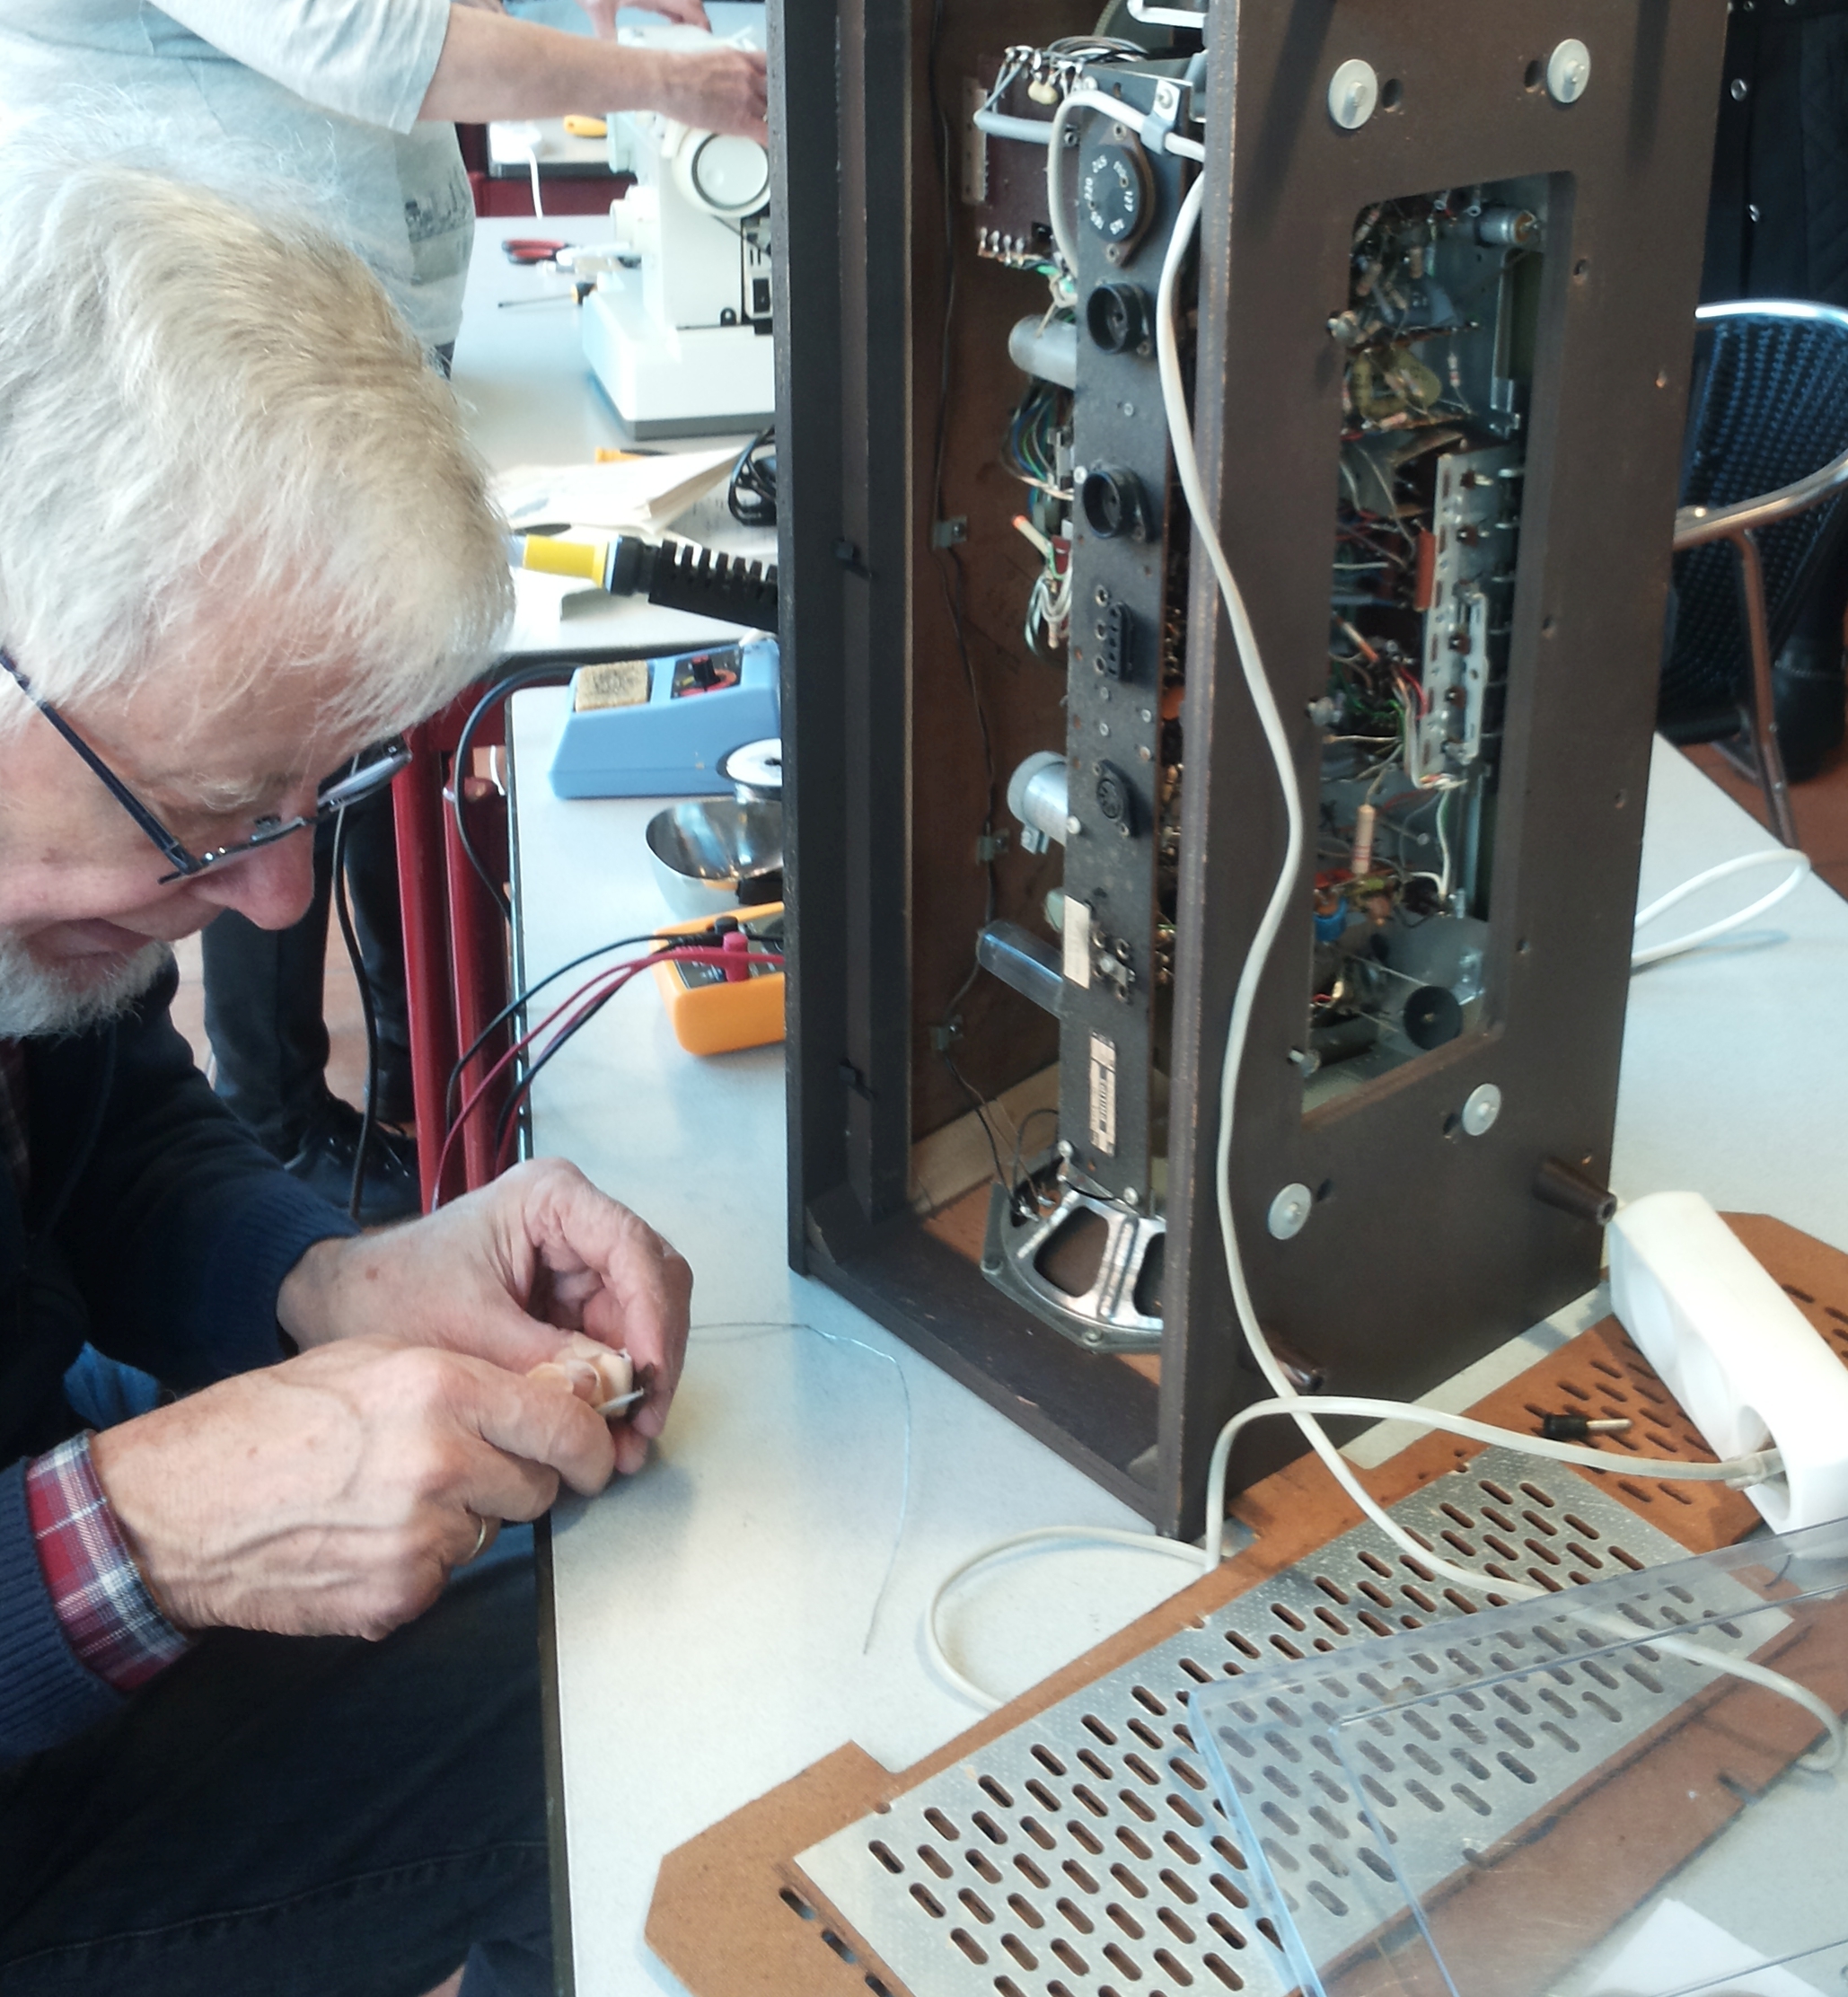 Peter working on a tube radio